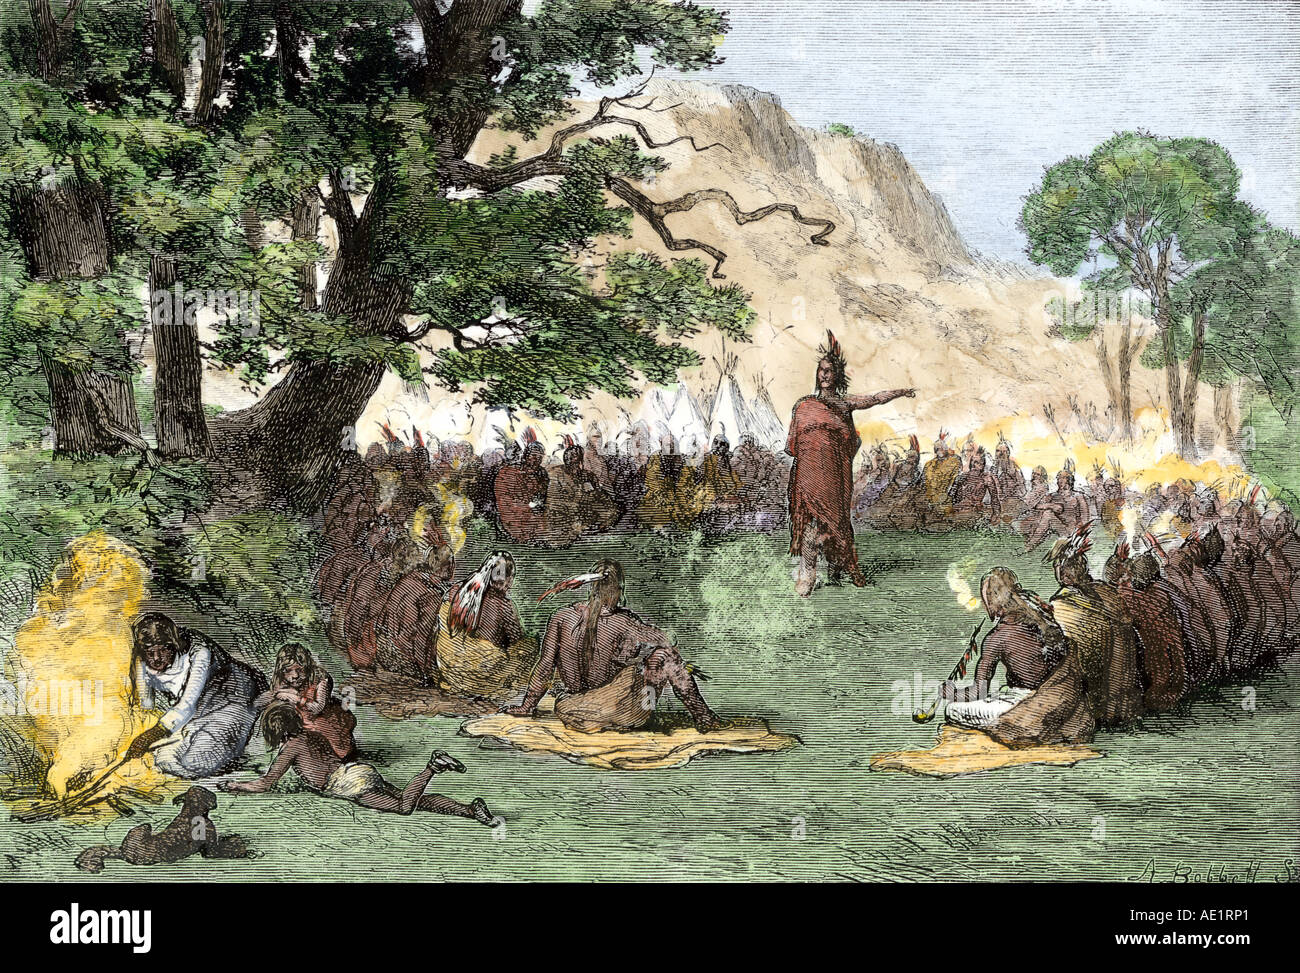 Chief Pontiac addressing a gathering of Native Americans to rally them against the British 1760s. Hand-colored woodcut Stock Photo